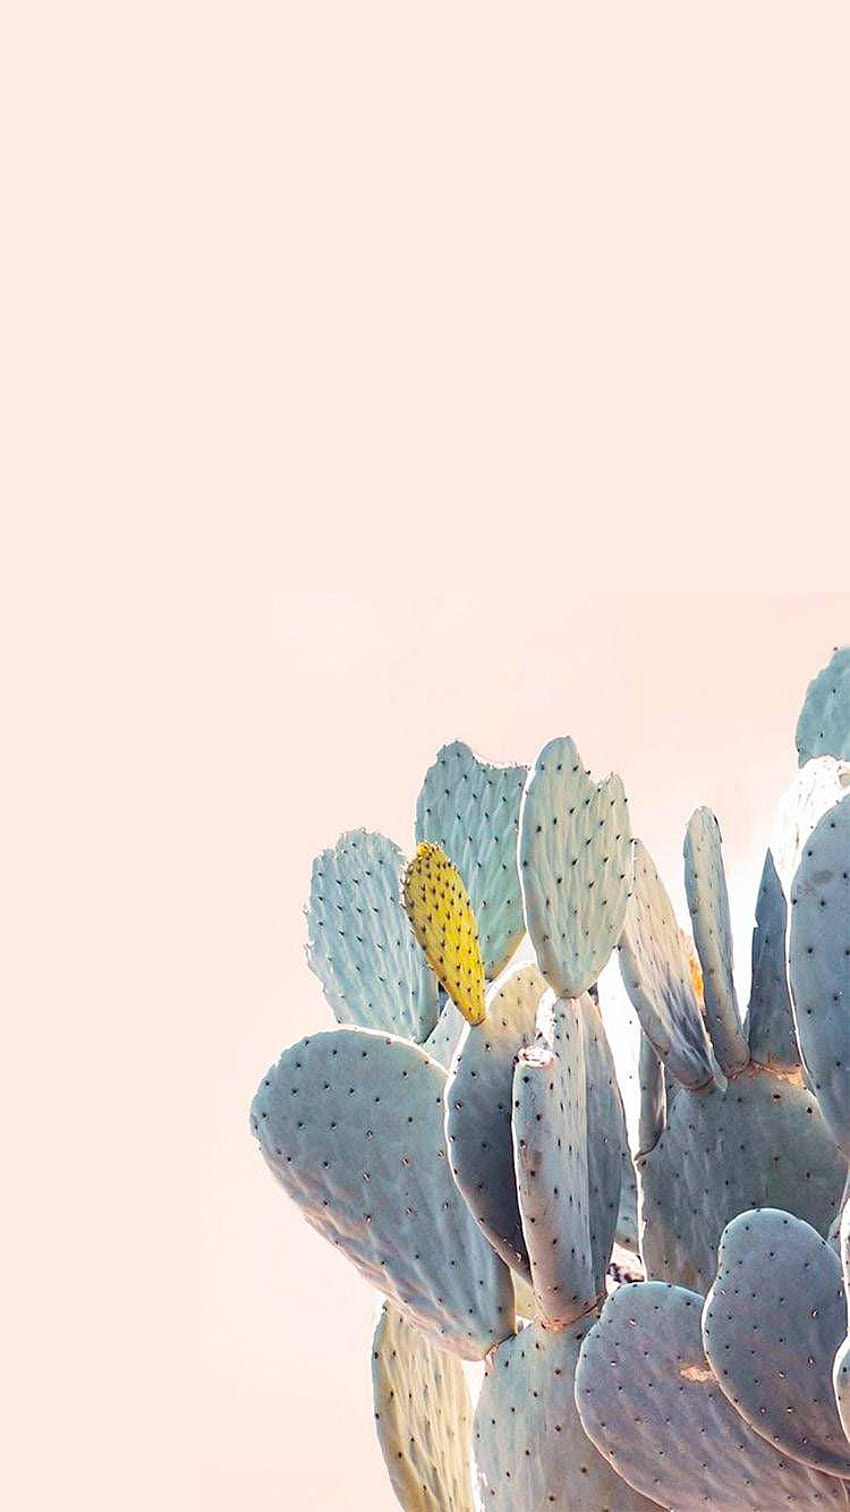 A cactus plant with a pink background - Cactus